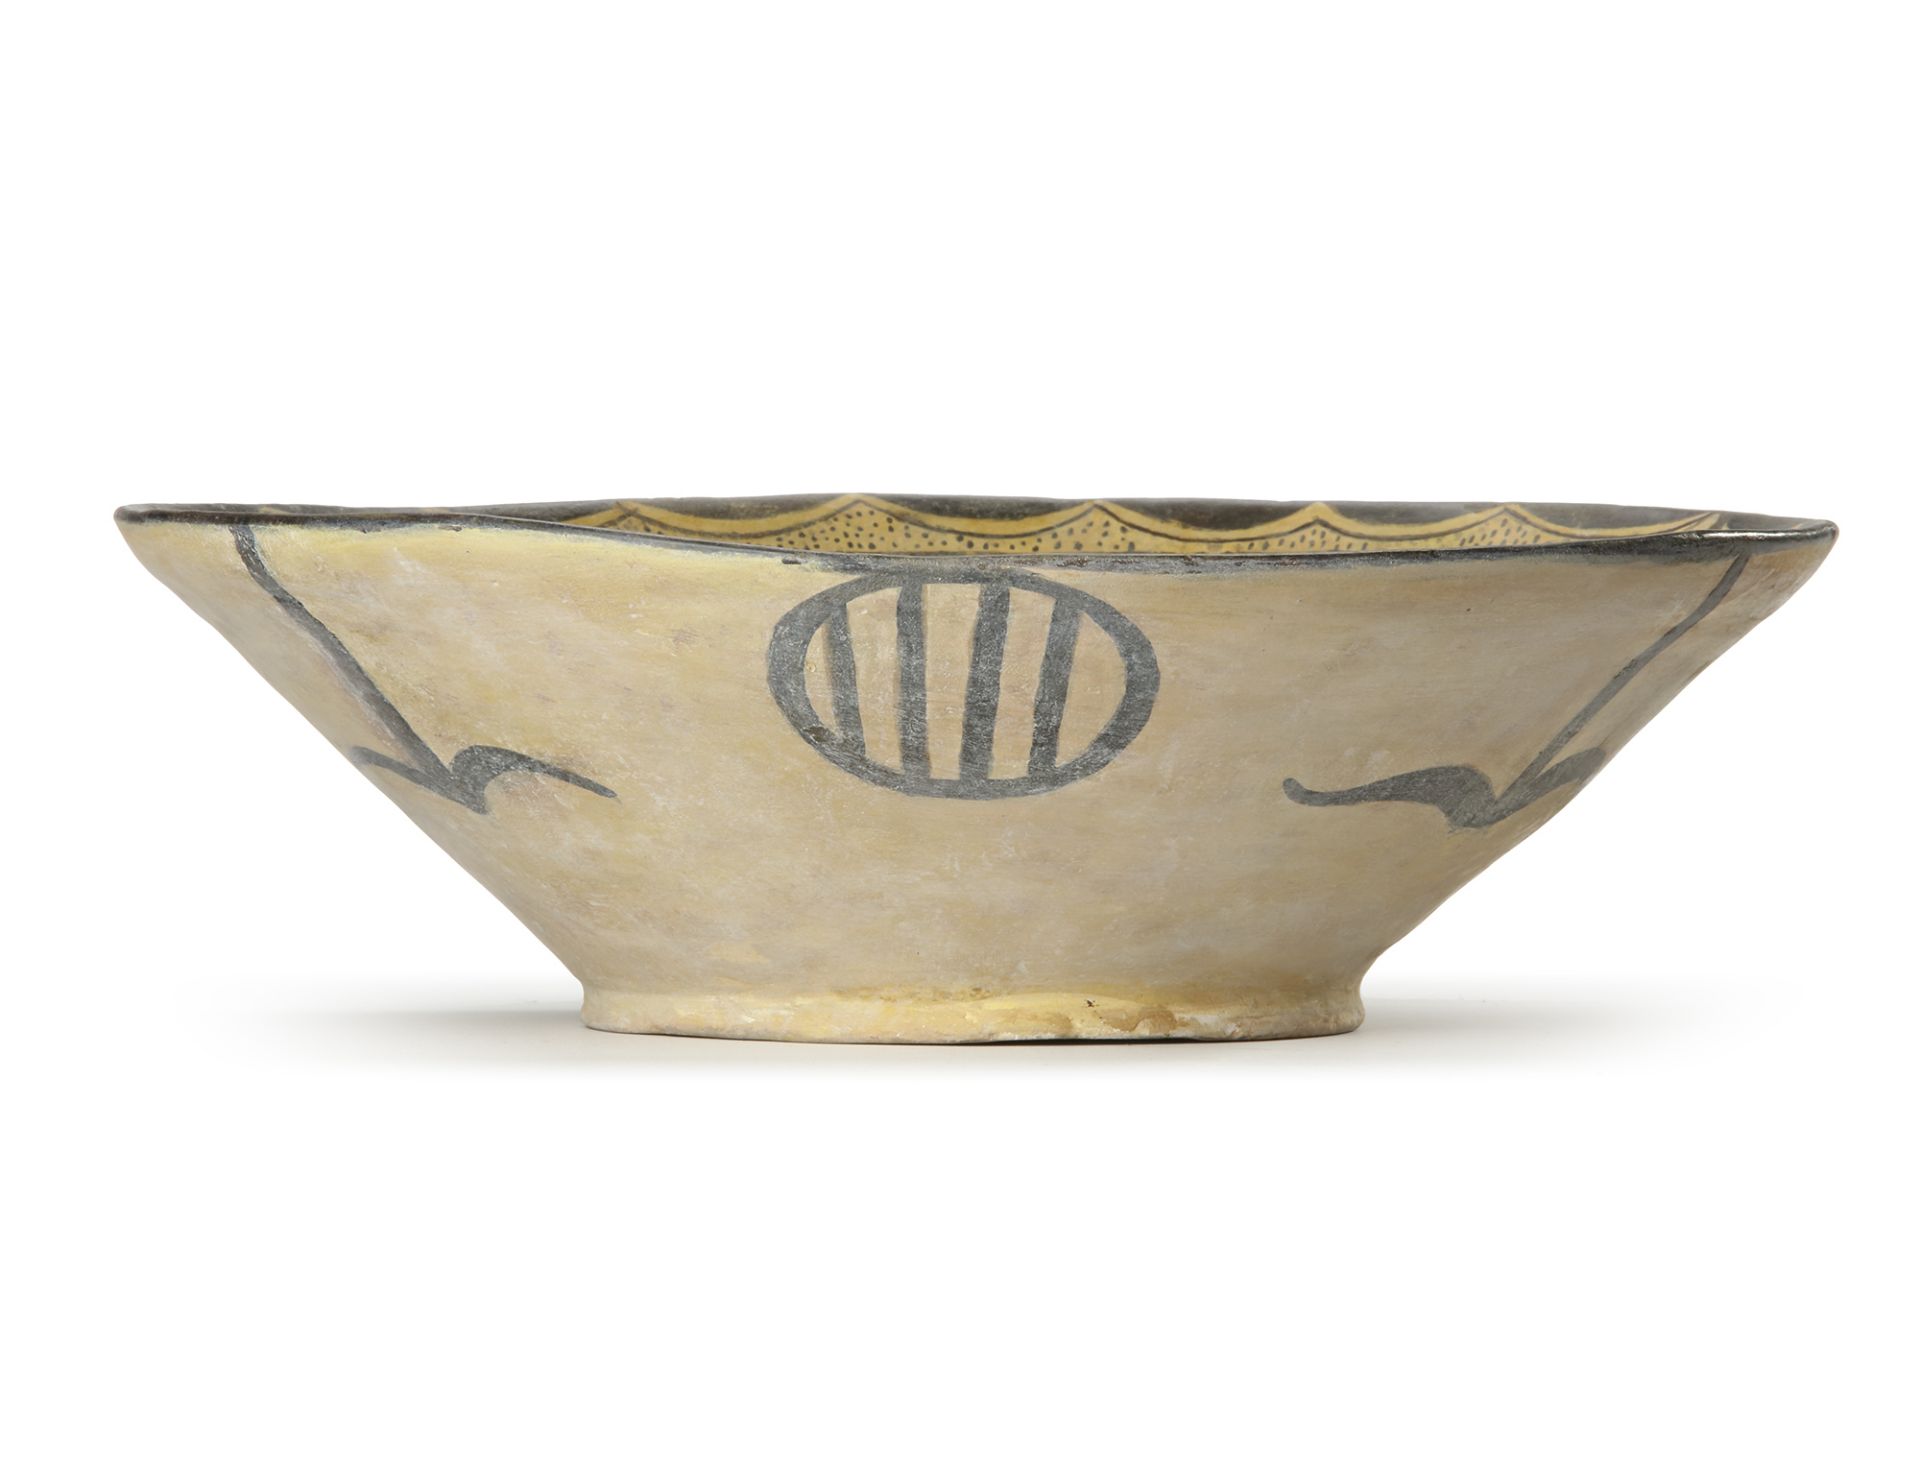 A NISHAPUR POTTERY BOWL, EASTERN PERSIA, 10TH CENTURY - Image 4 of 10